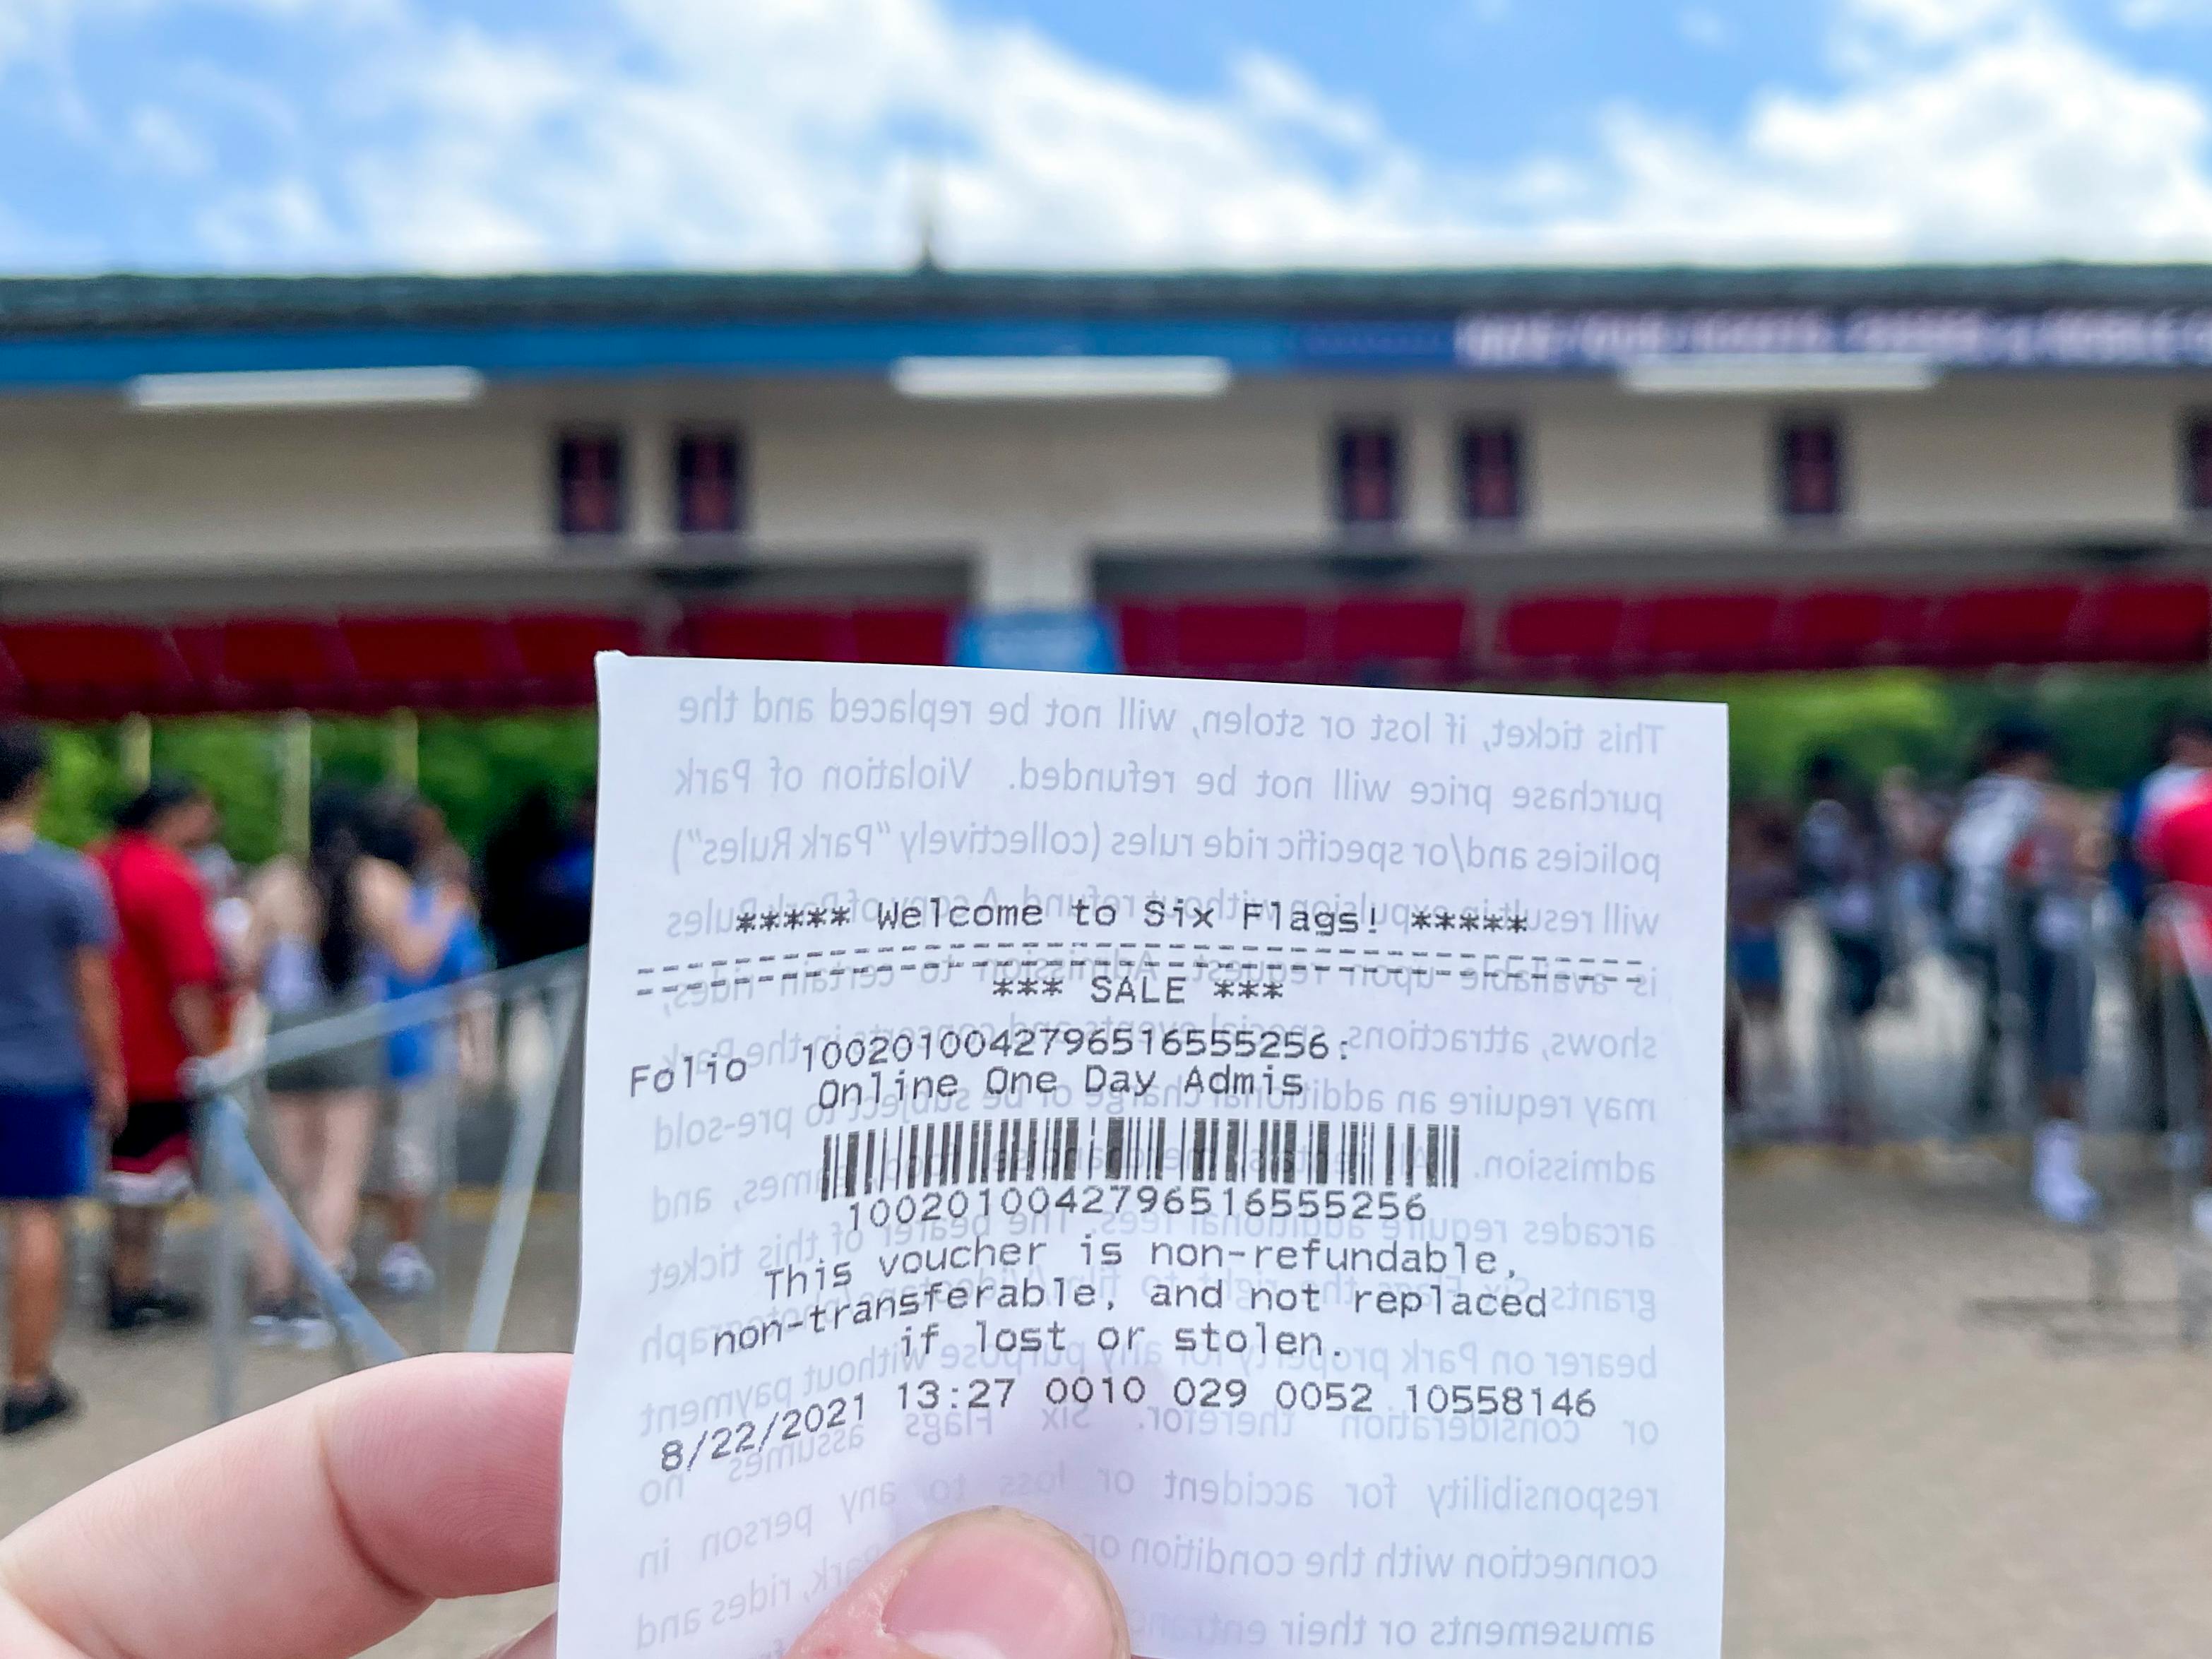 A Six Flags ticket held in front of the amusement park entrance